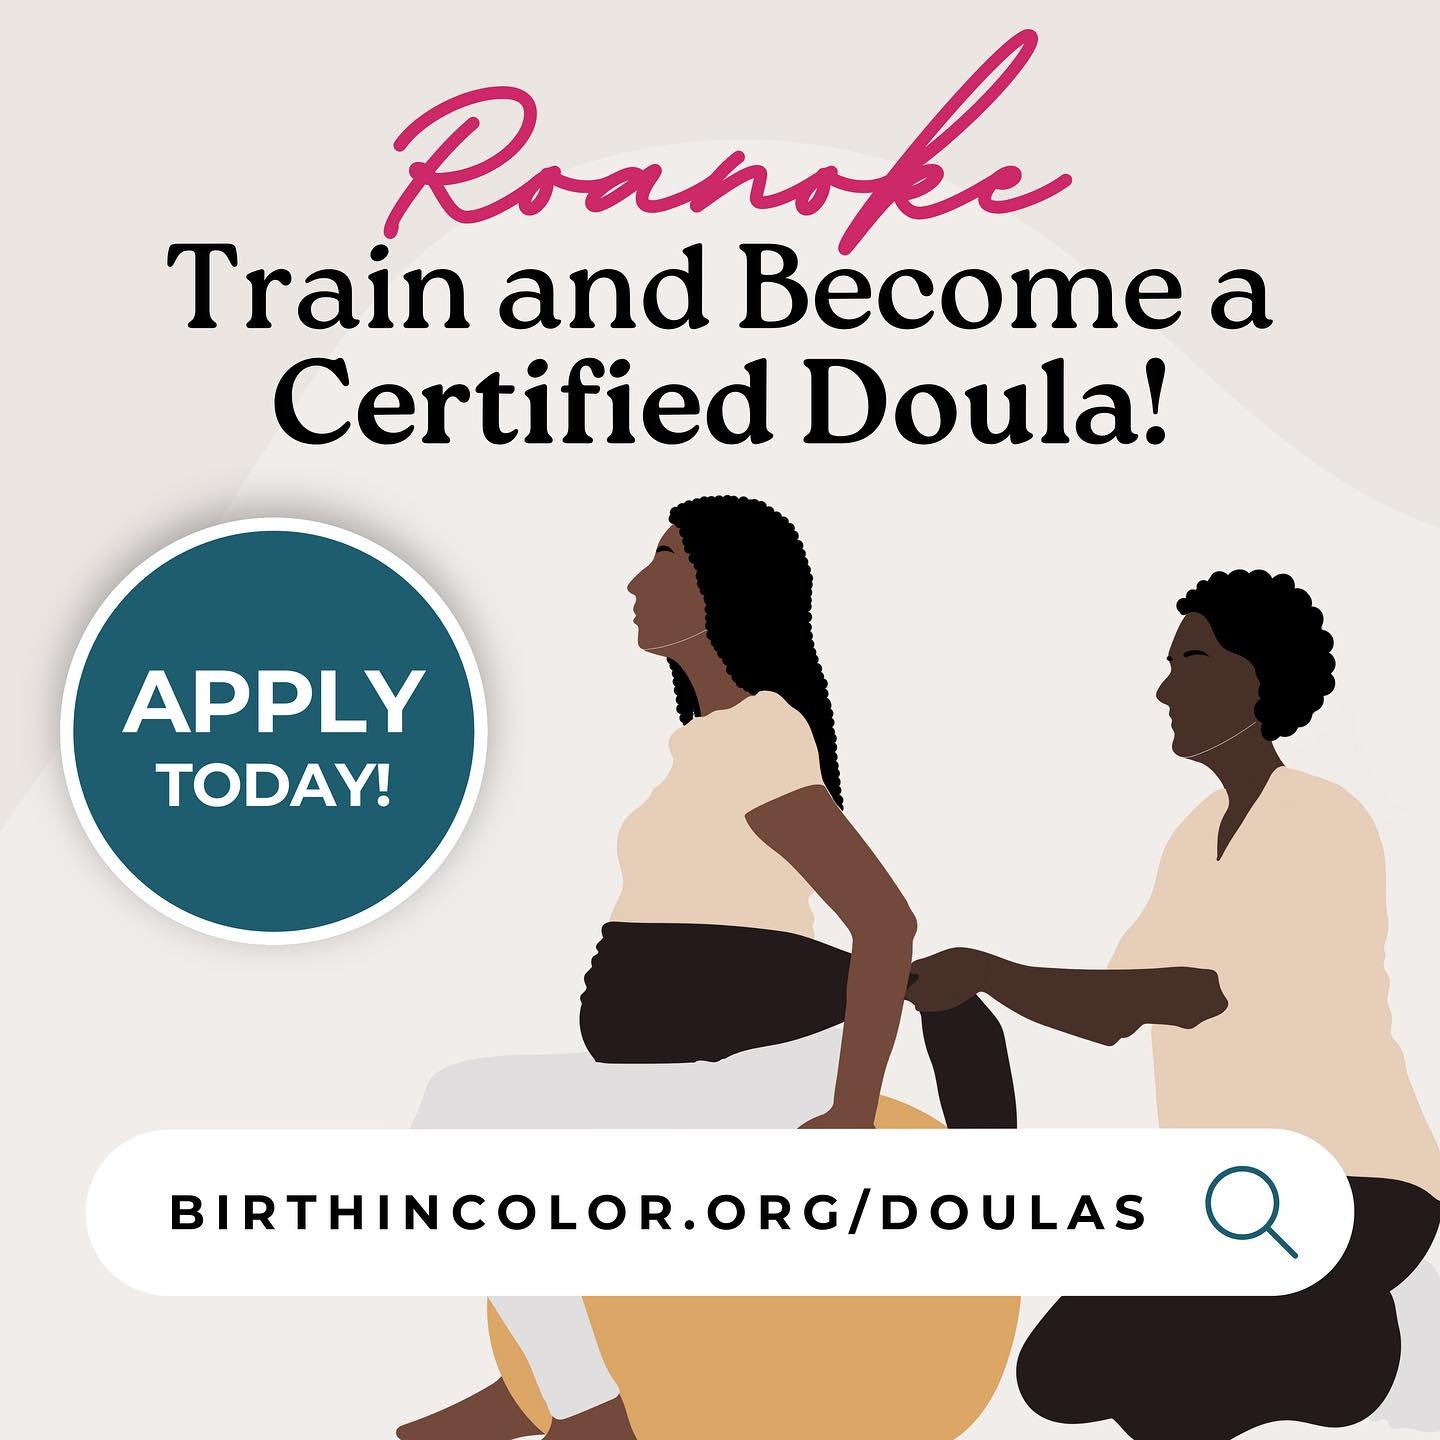 🌈 Train to provide inclusive care to your community and become a certified doula today! 

🔗 https://birthincolor.org/doulas

🌟Our comprehensive training program equips you with the skills and knowledge to support birthing individuals and families 